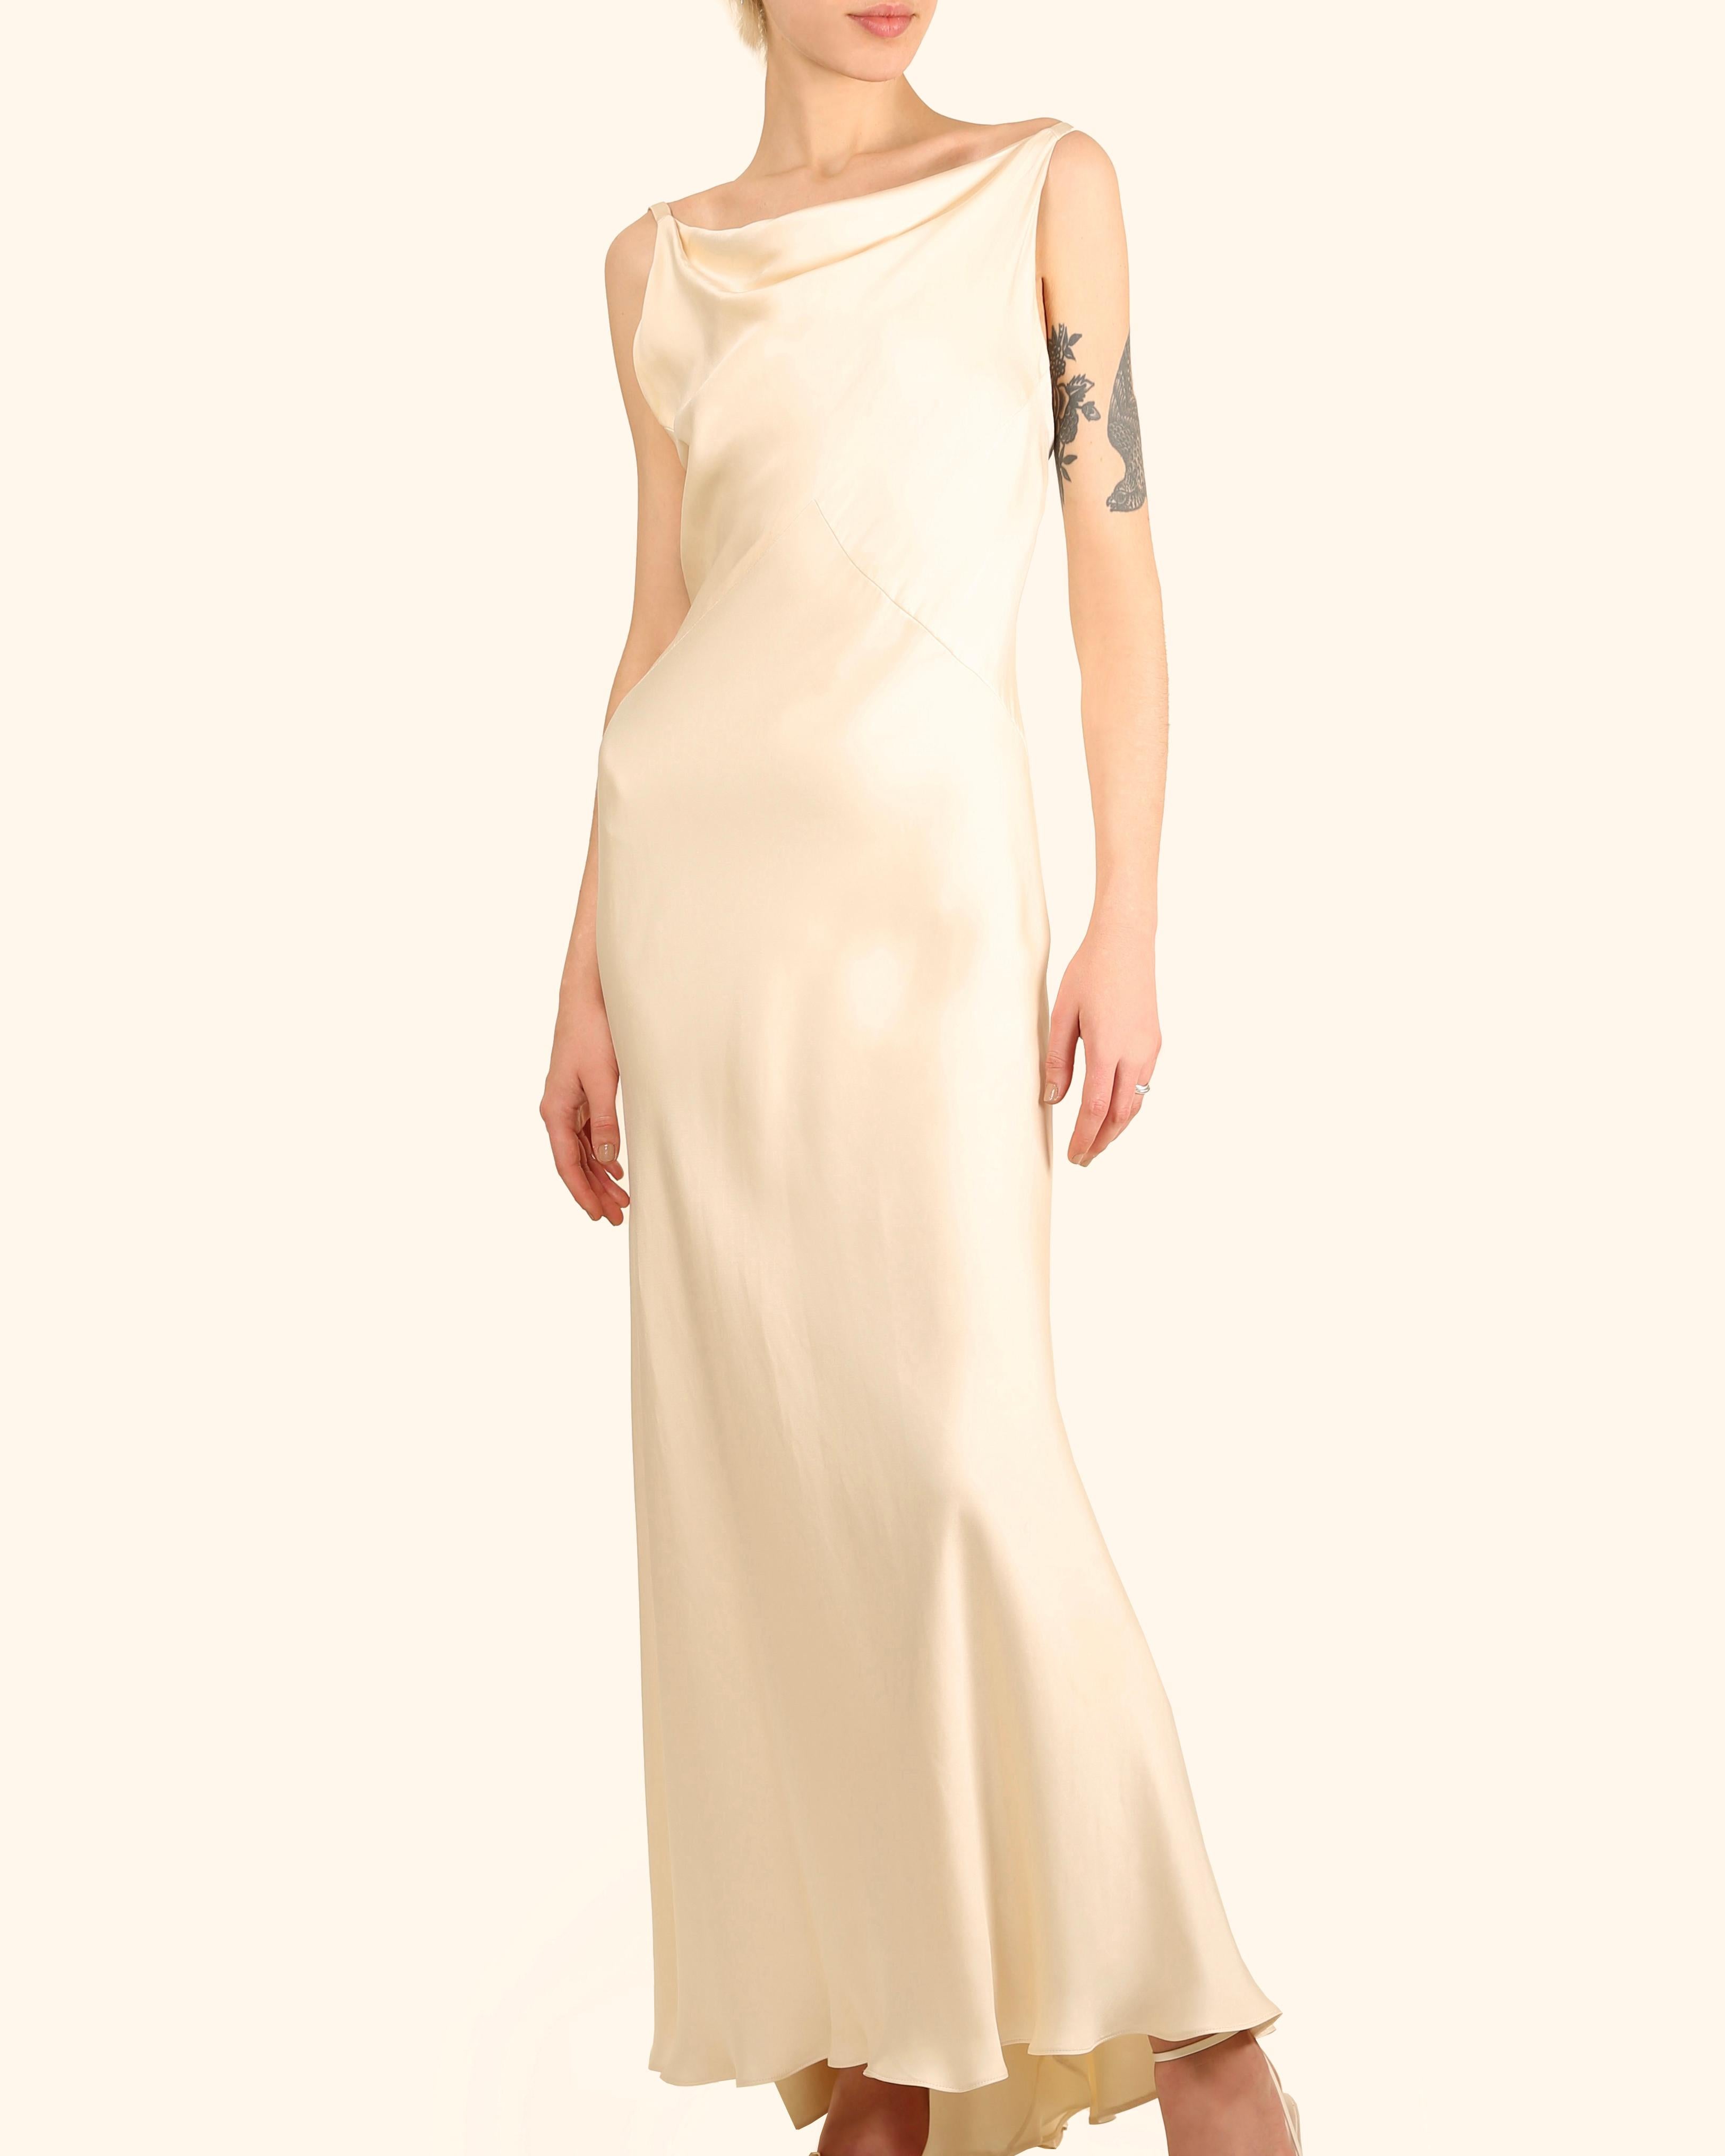 Ralph Lauren champagne bias cut backless silk slip style backless gown dress For Sale 5